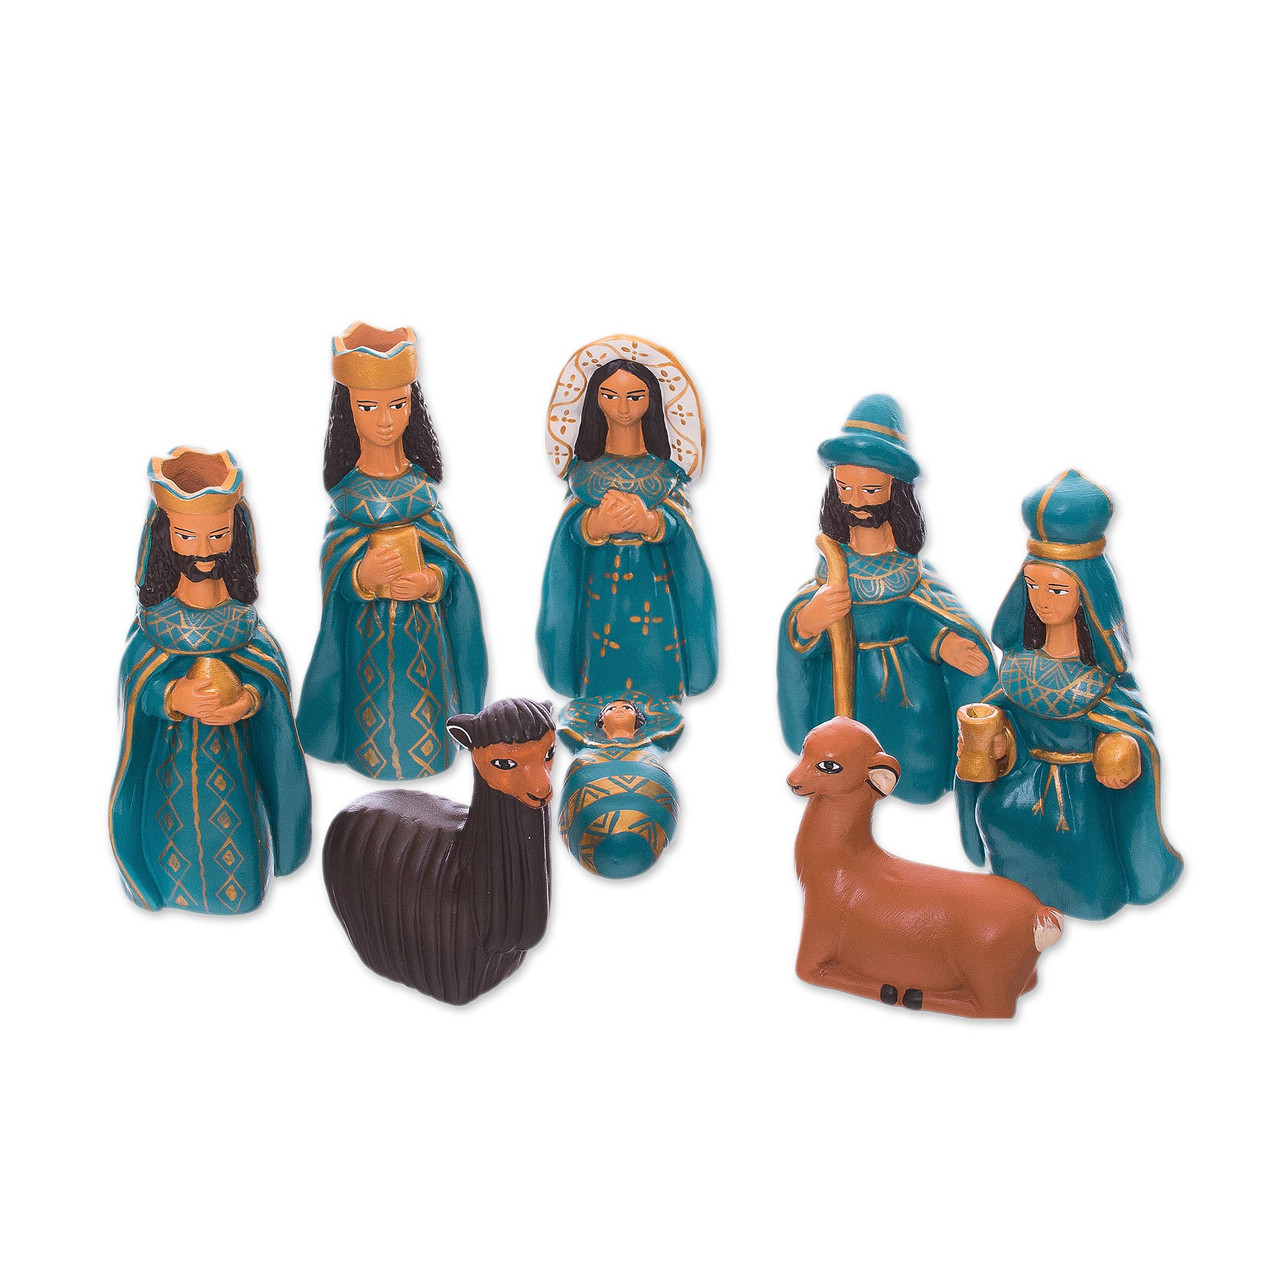 Ceramic Christmas Nativity Sculpture in Blue from Peru 'Birth Beneath the  Blue Tree' - Smithsonian Folklife Festival Marketplace